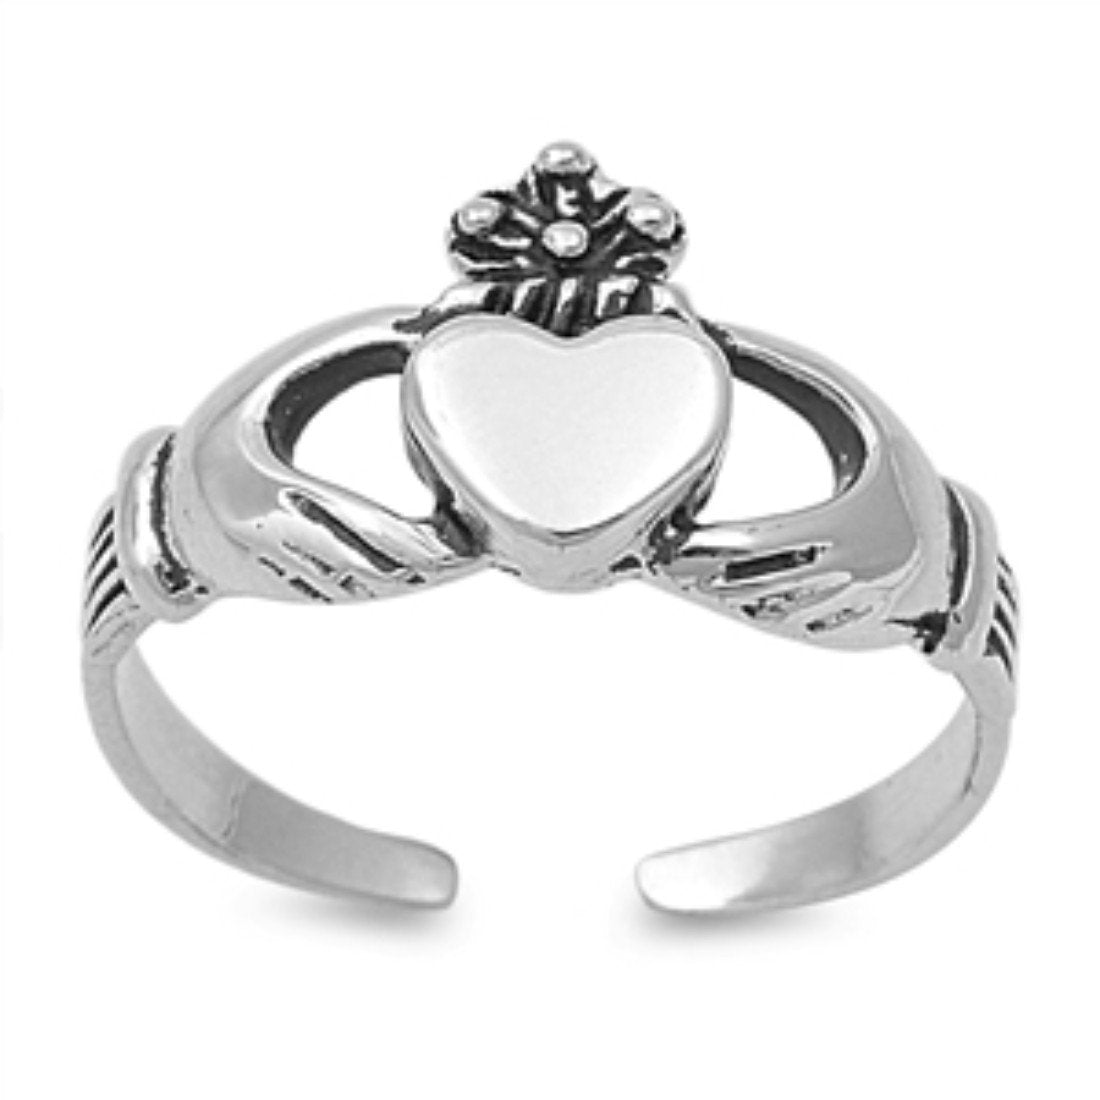 Claddagh Silver Toe Ring Adjustable Band 925 Sterling Silver (8mm)